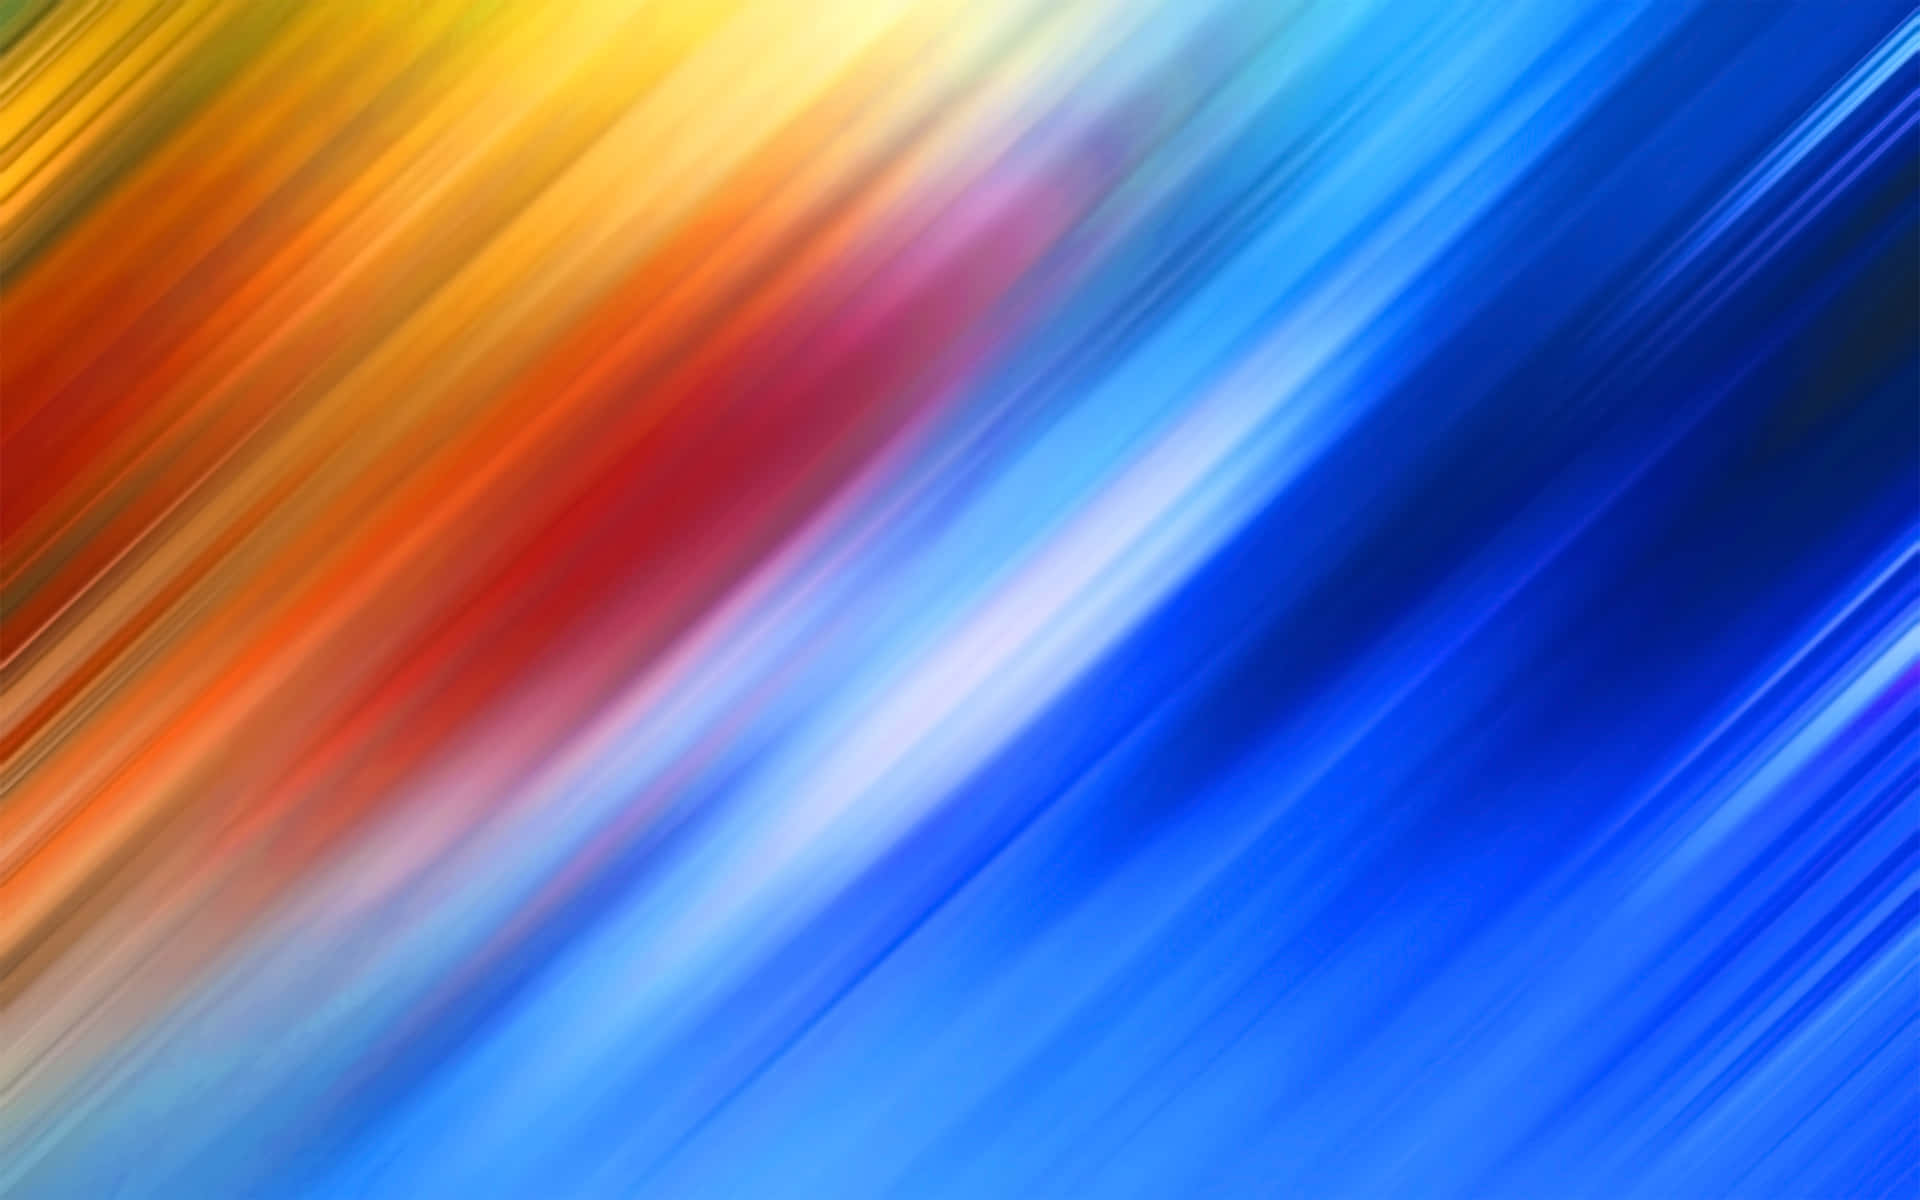 A Colorful Abstract Background With A Rainbow Of Colors